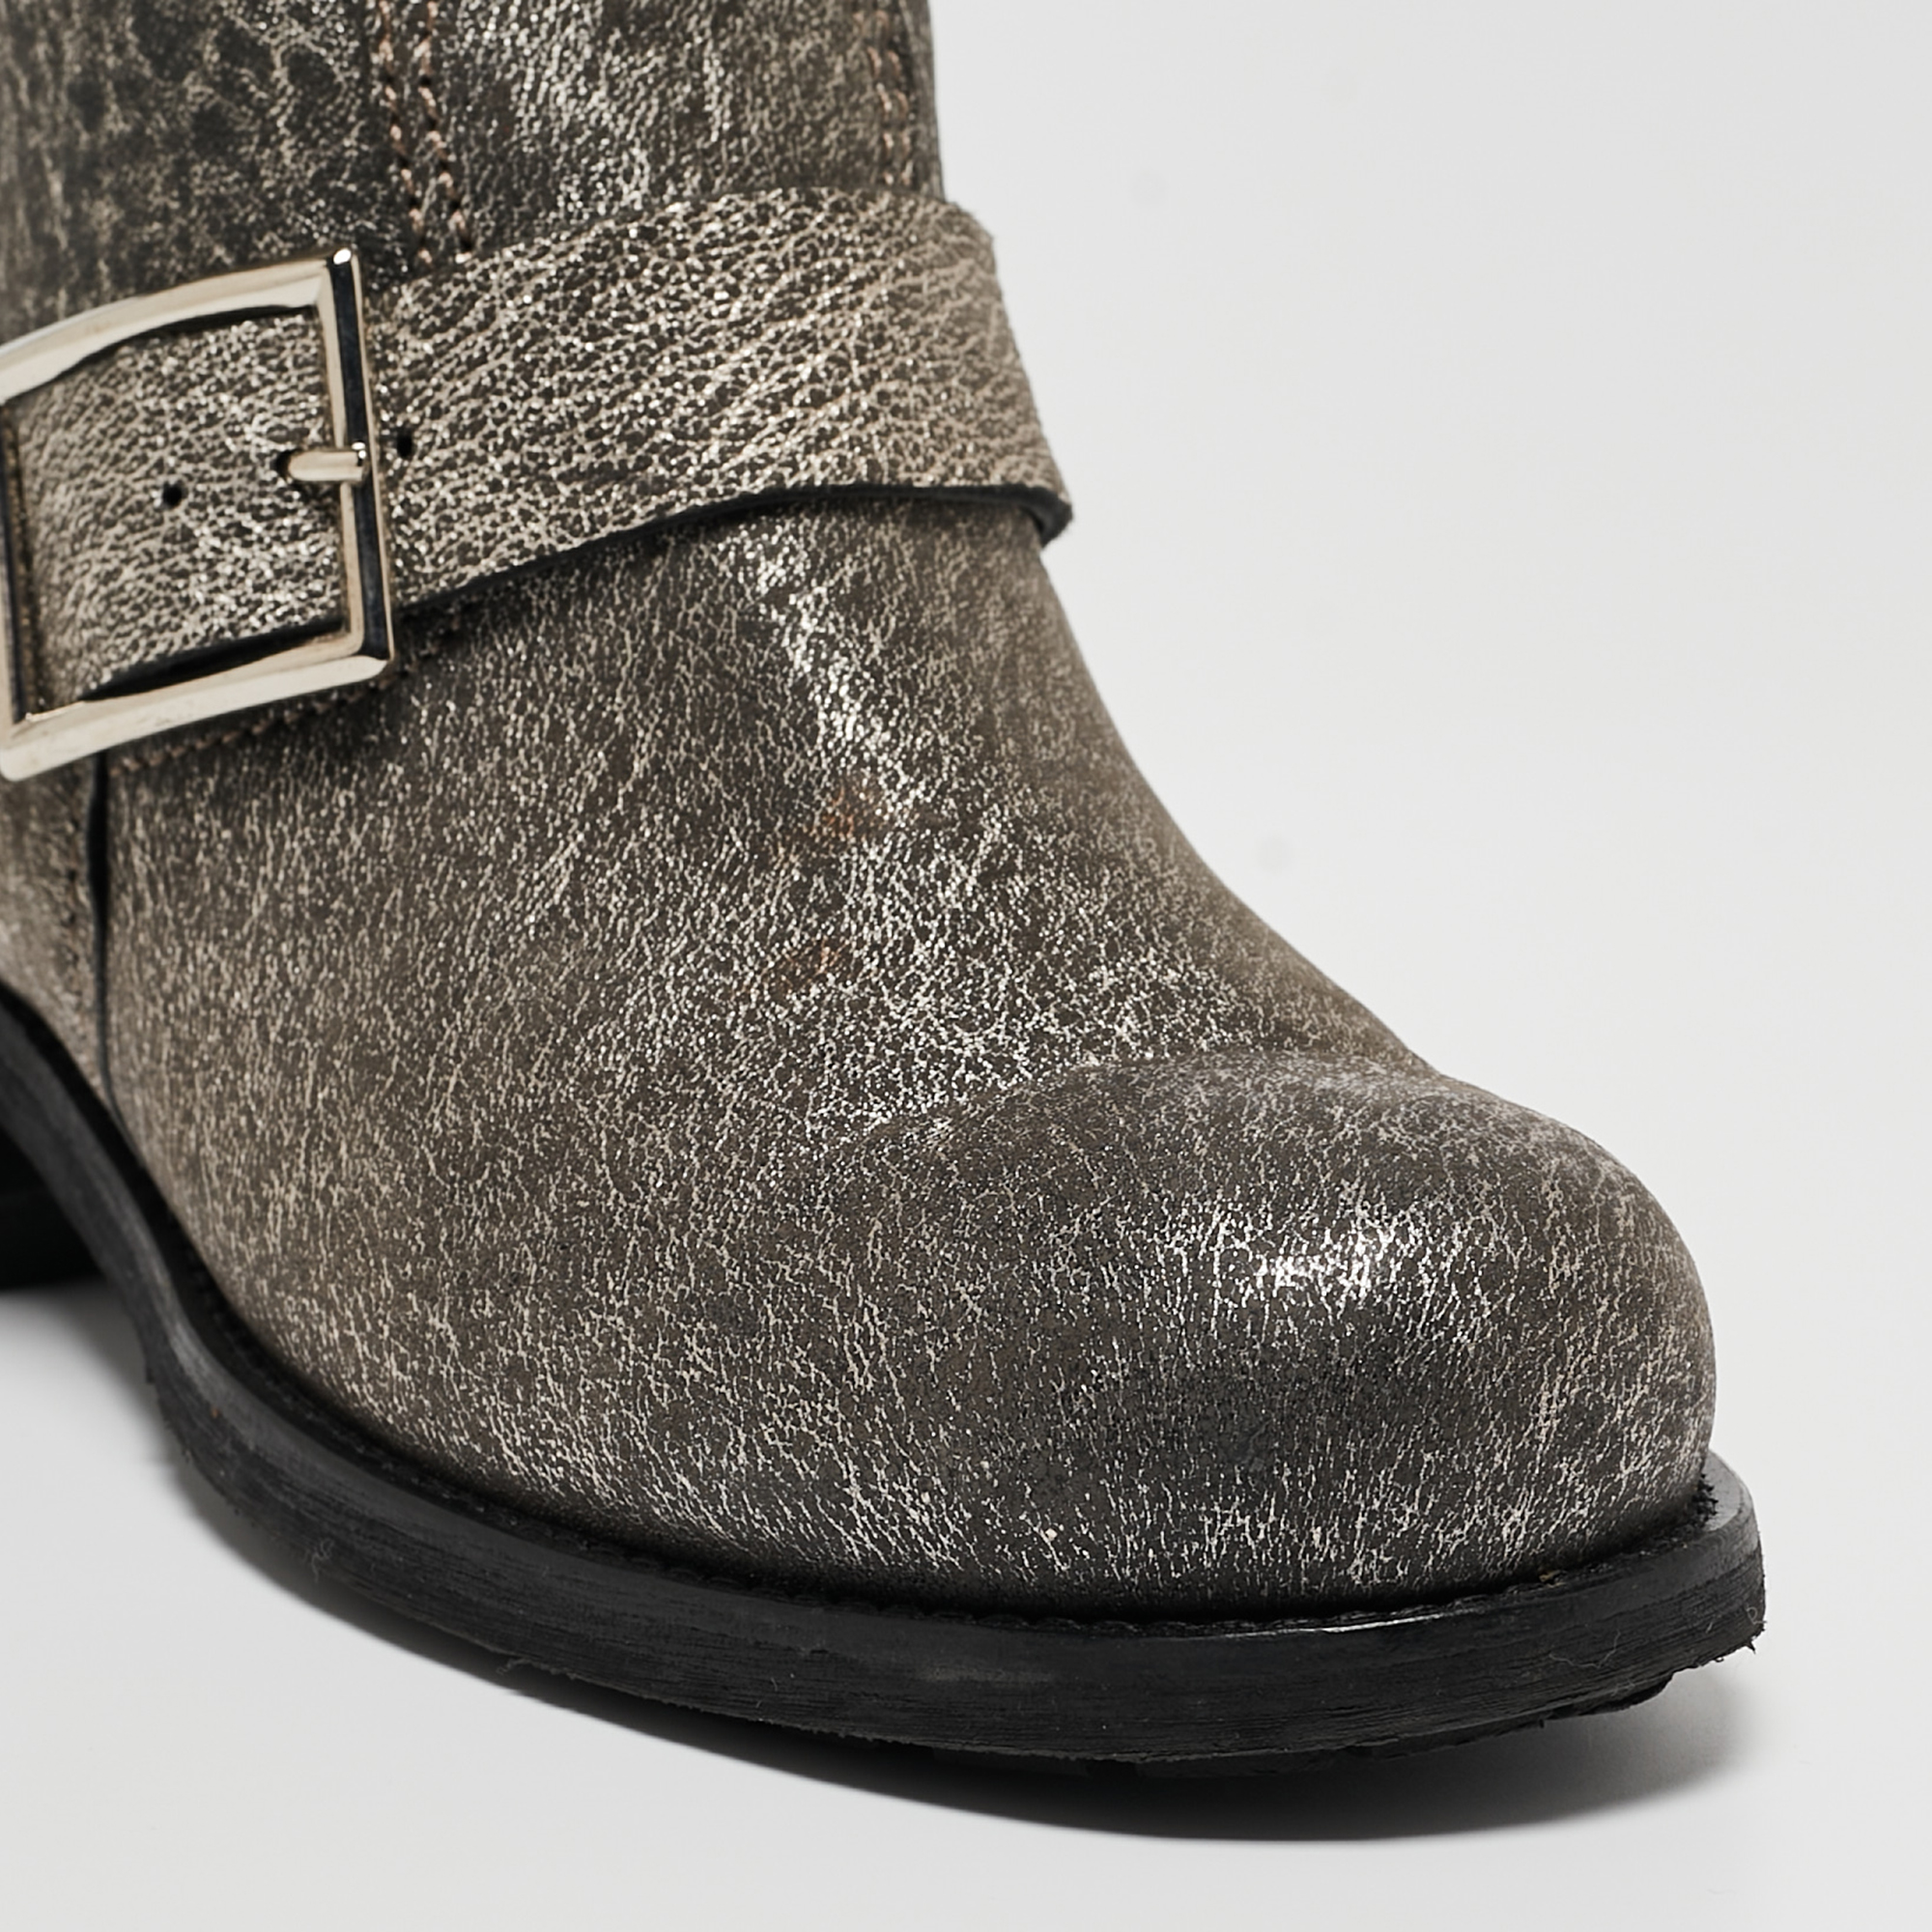 Jimmy Choo Grey Textured Leather Buckle Detail Ankle Boots Size 38